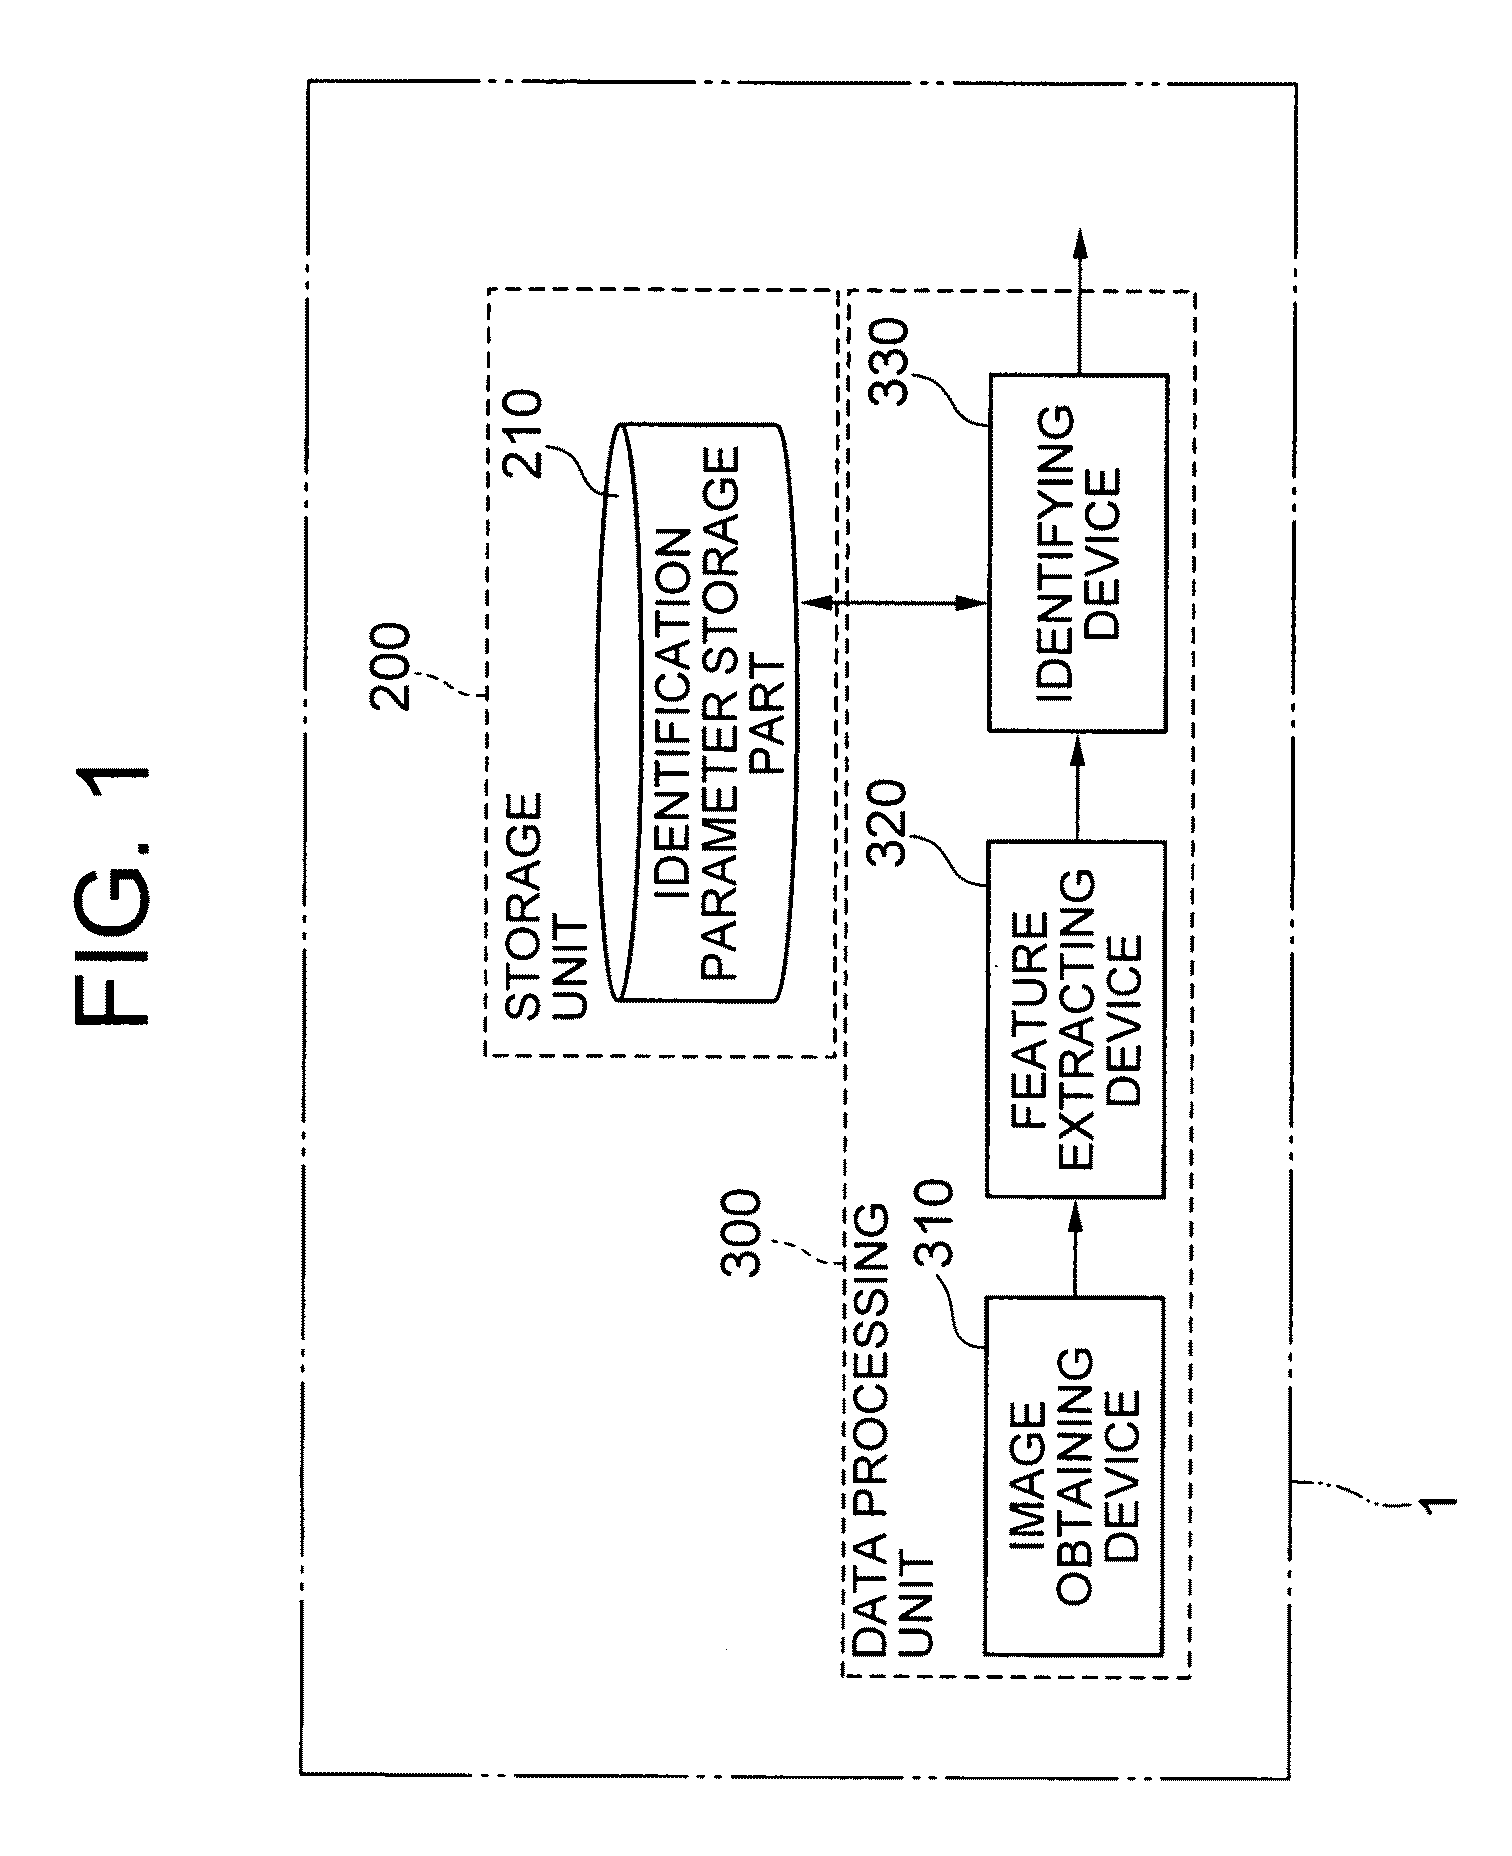 Object identification parameter learning system